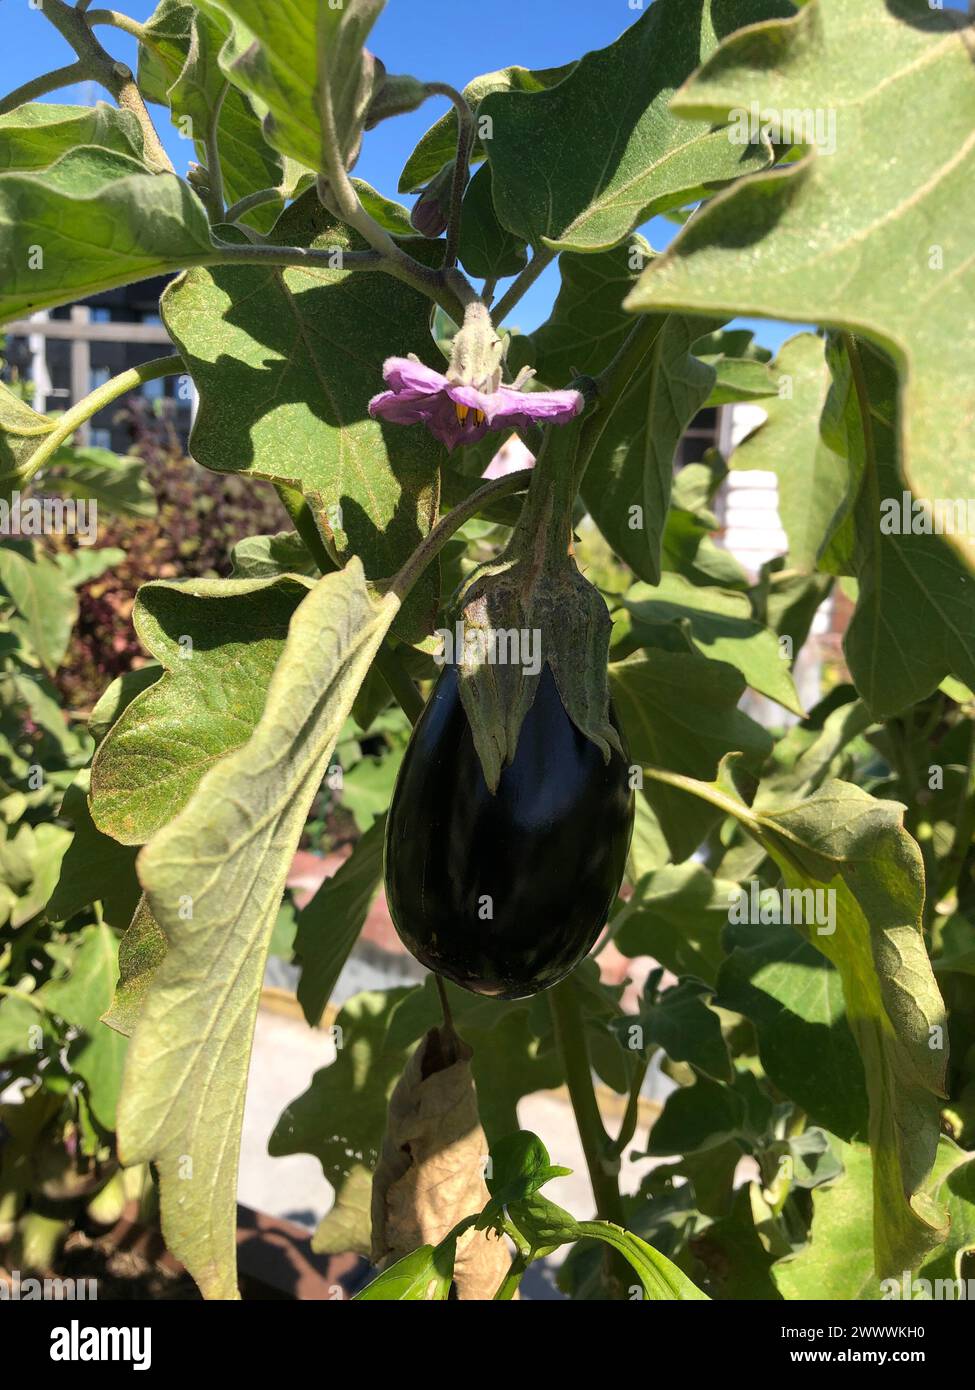 Fresh eggplant growing in garden with vibrant green leaves and purple blooms Stock Photo